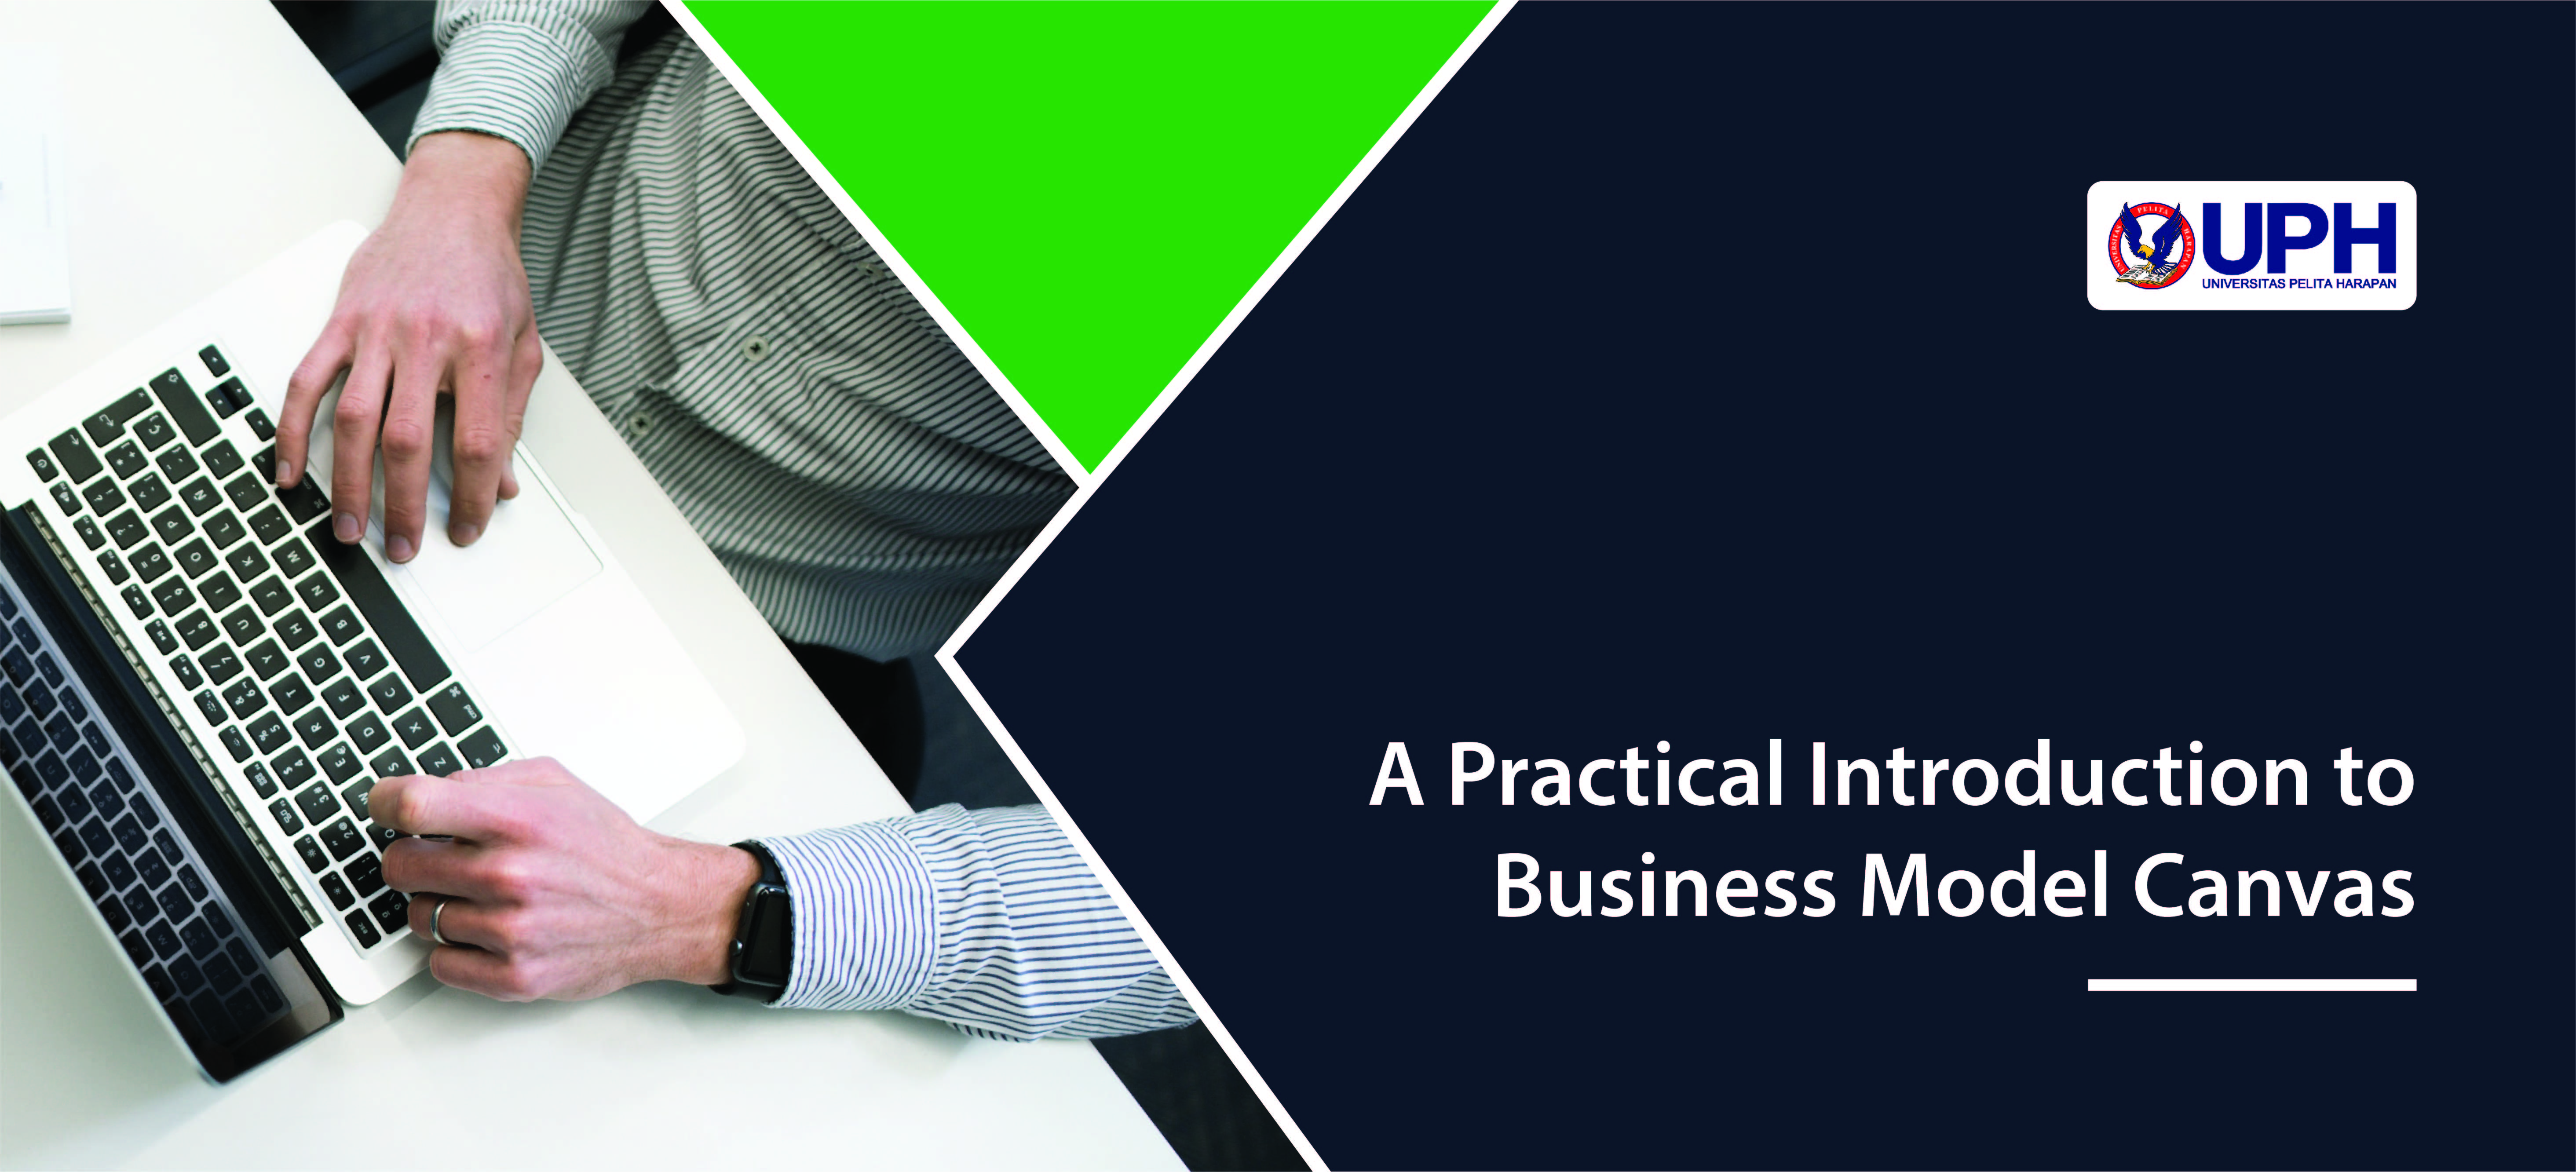 A Practical Introduction to Business Model Canvas - MGT14104